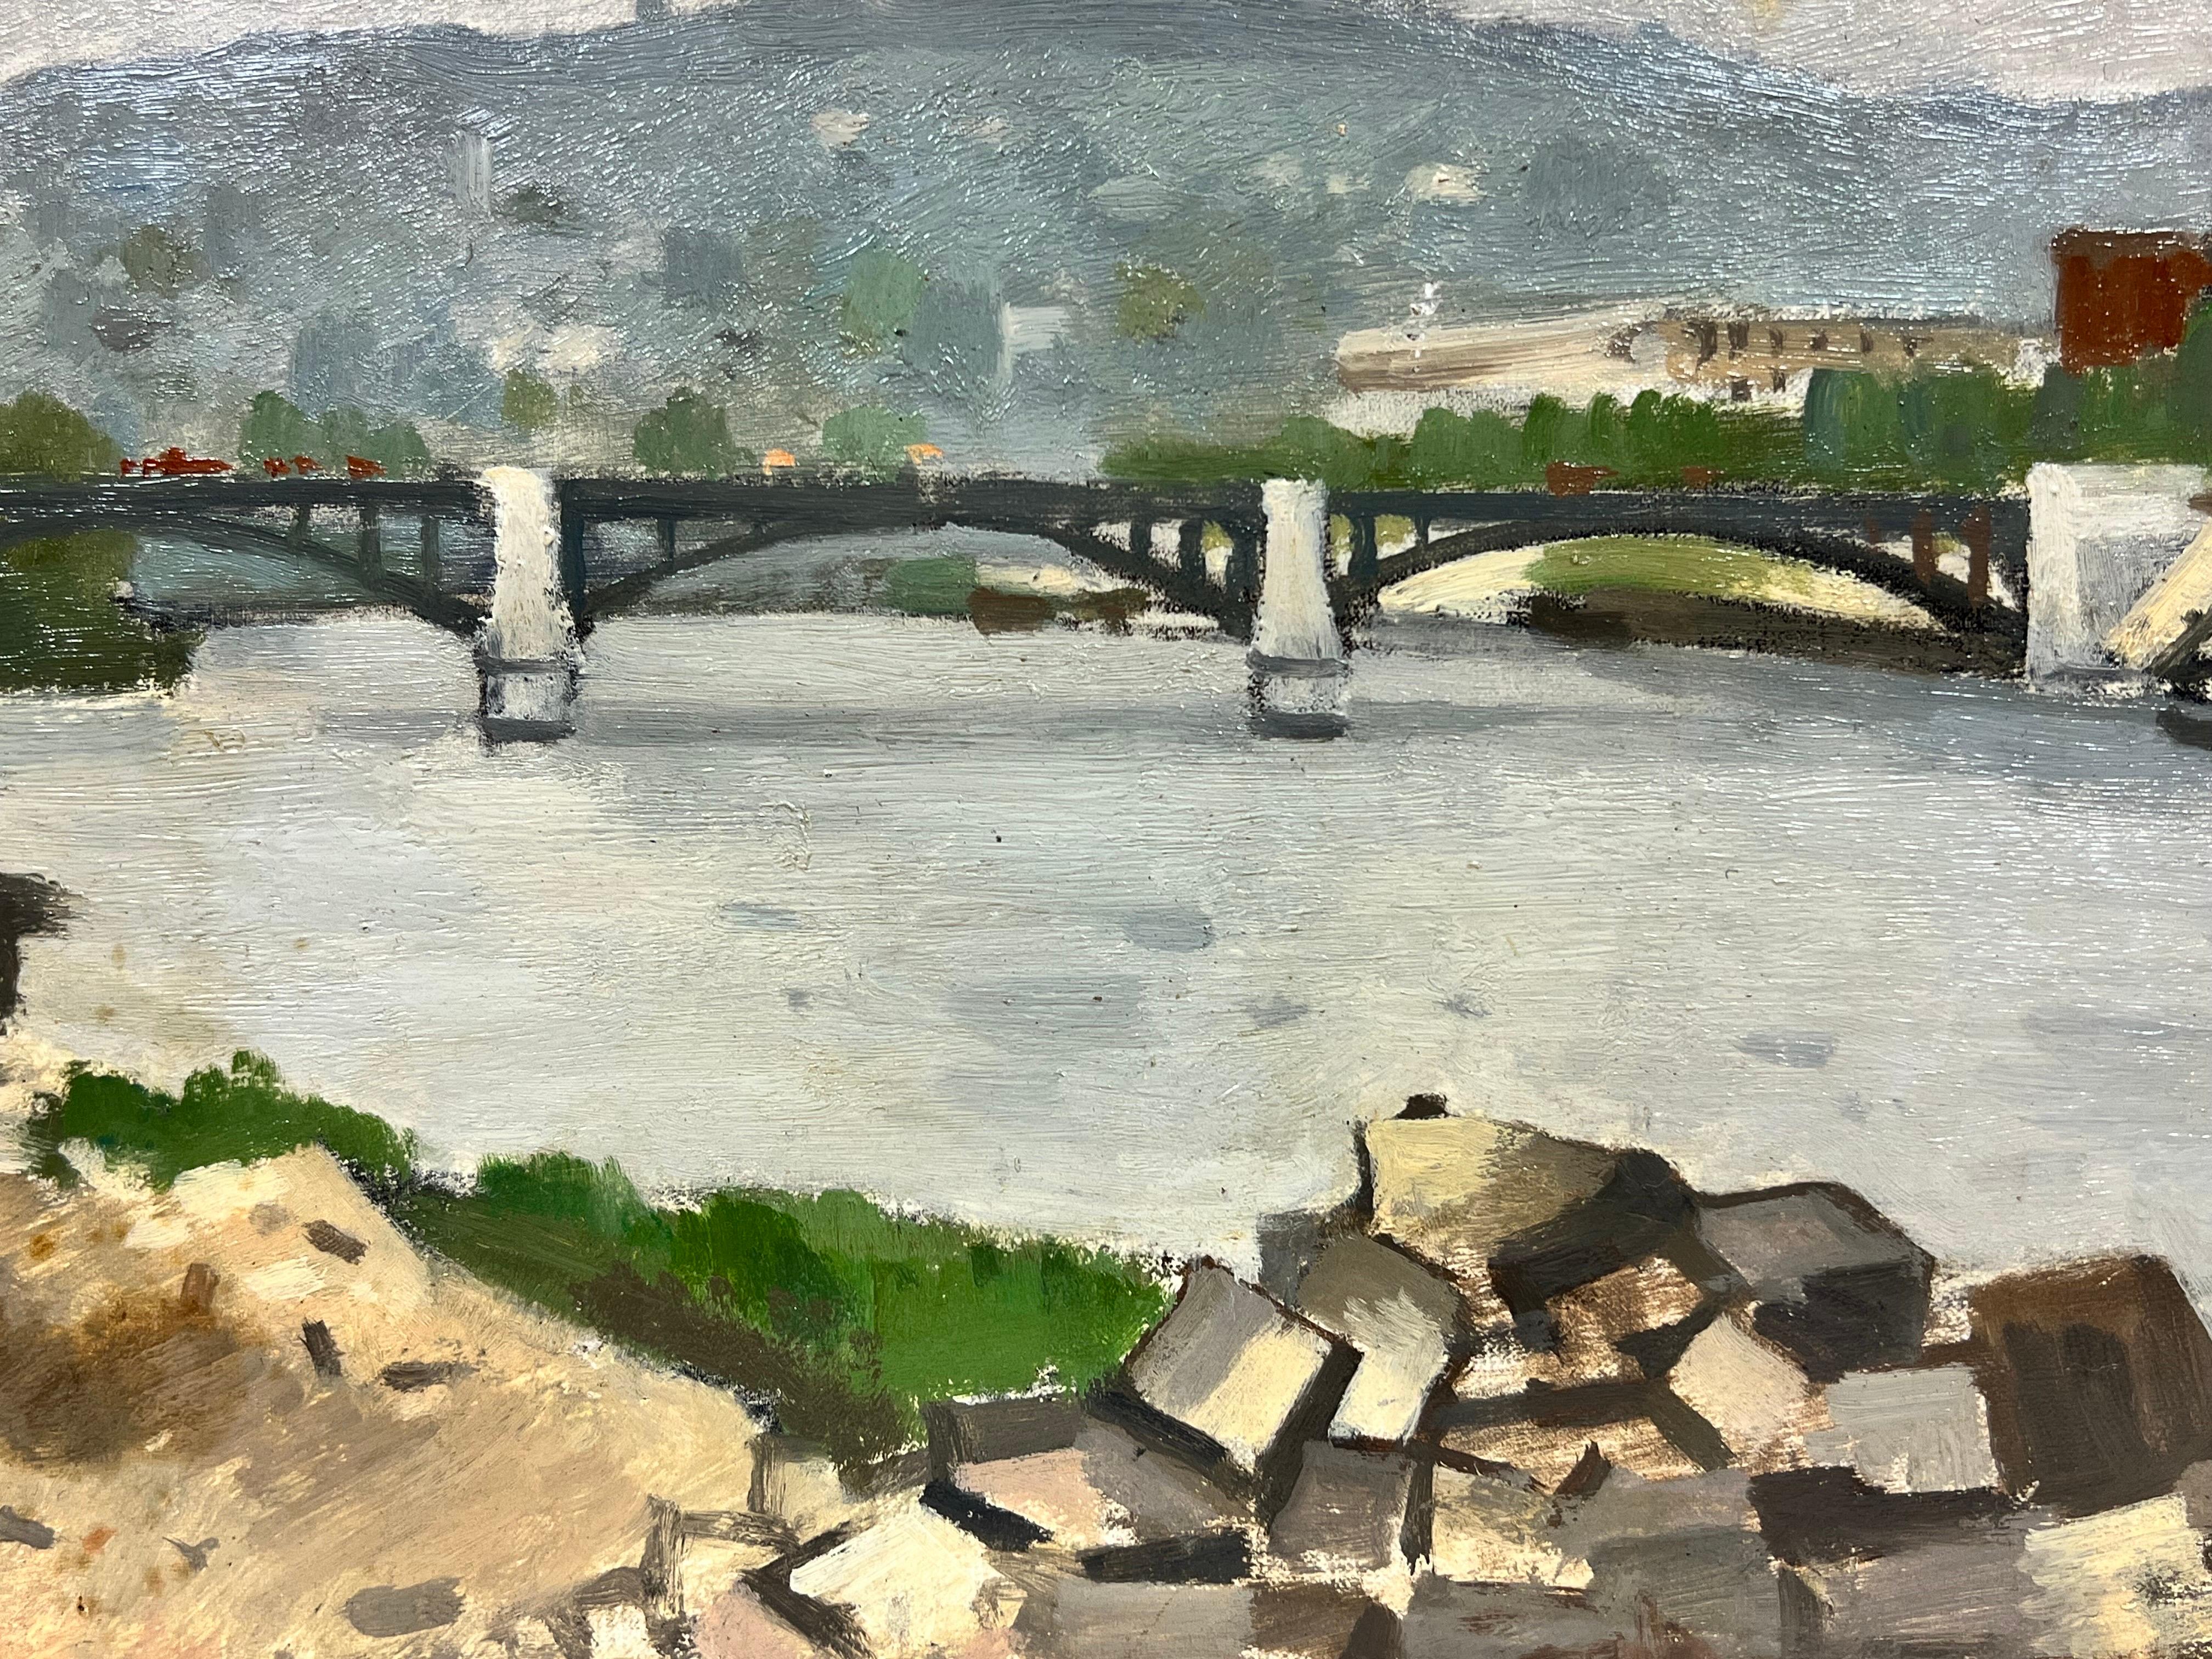 The Working River
signed Rene Durey, early 20th century 
oil painting on canvas, unframed
painting: 11 x 18 inches
provenance: private collection, France 
condition: overall very good